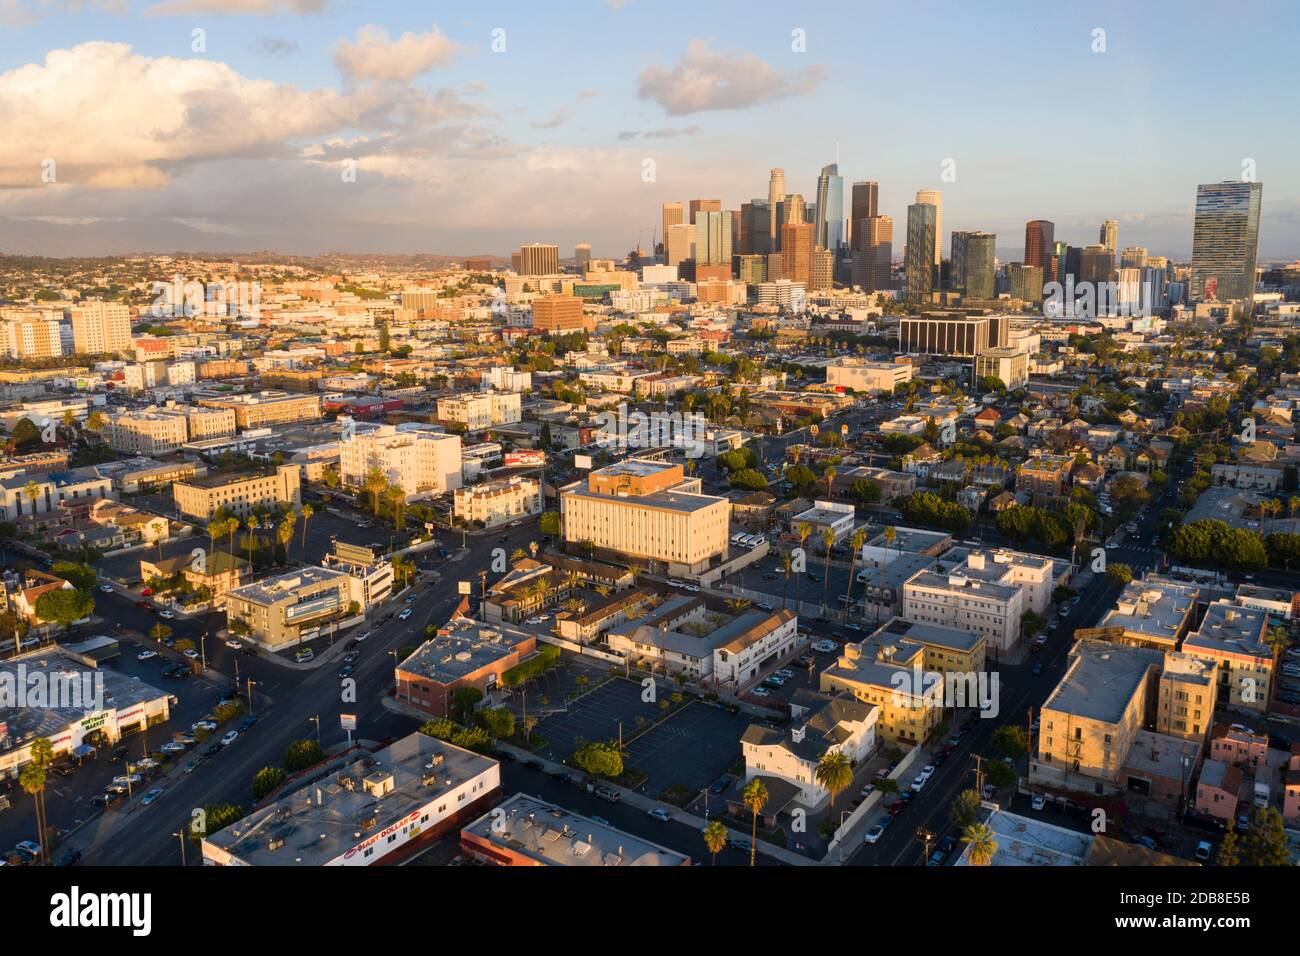 Aerial View Of The Urban Skyline Of Downtown Los Angeles Hi Res Stock